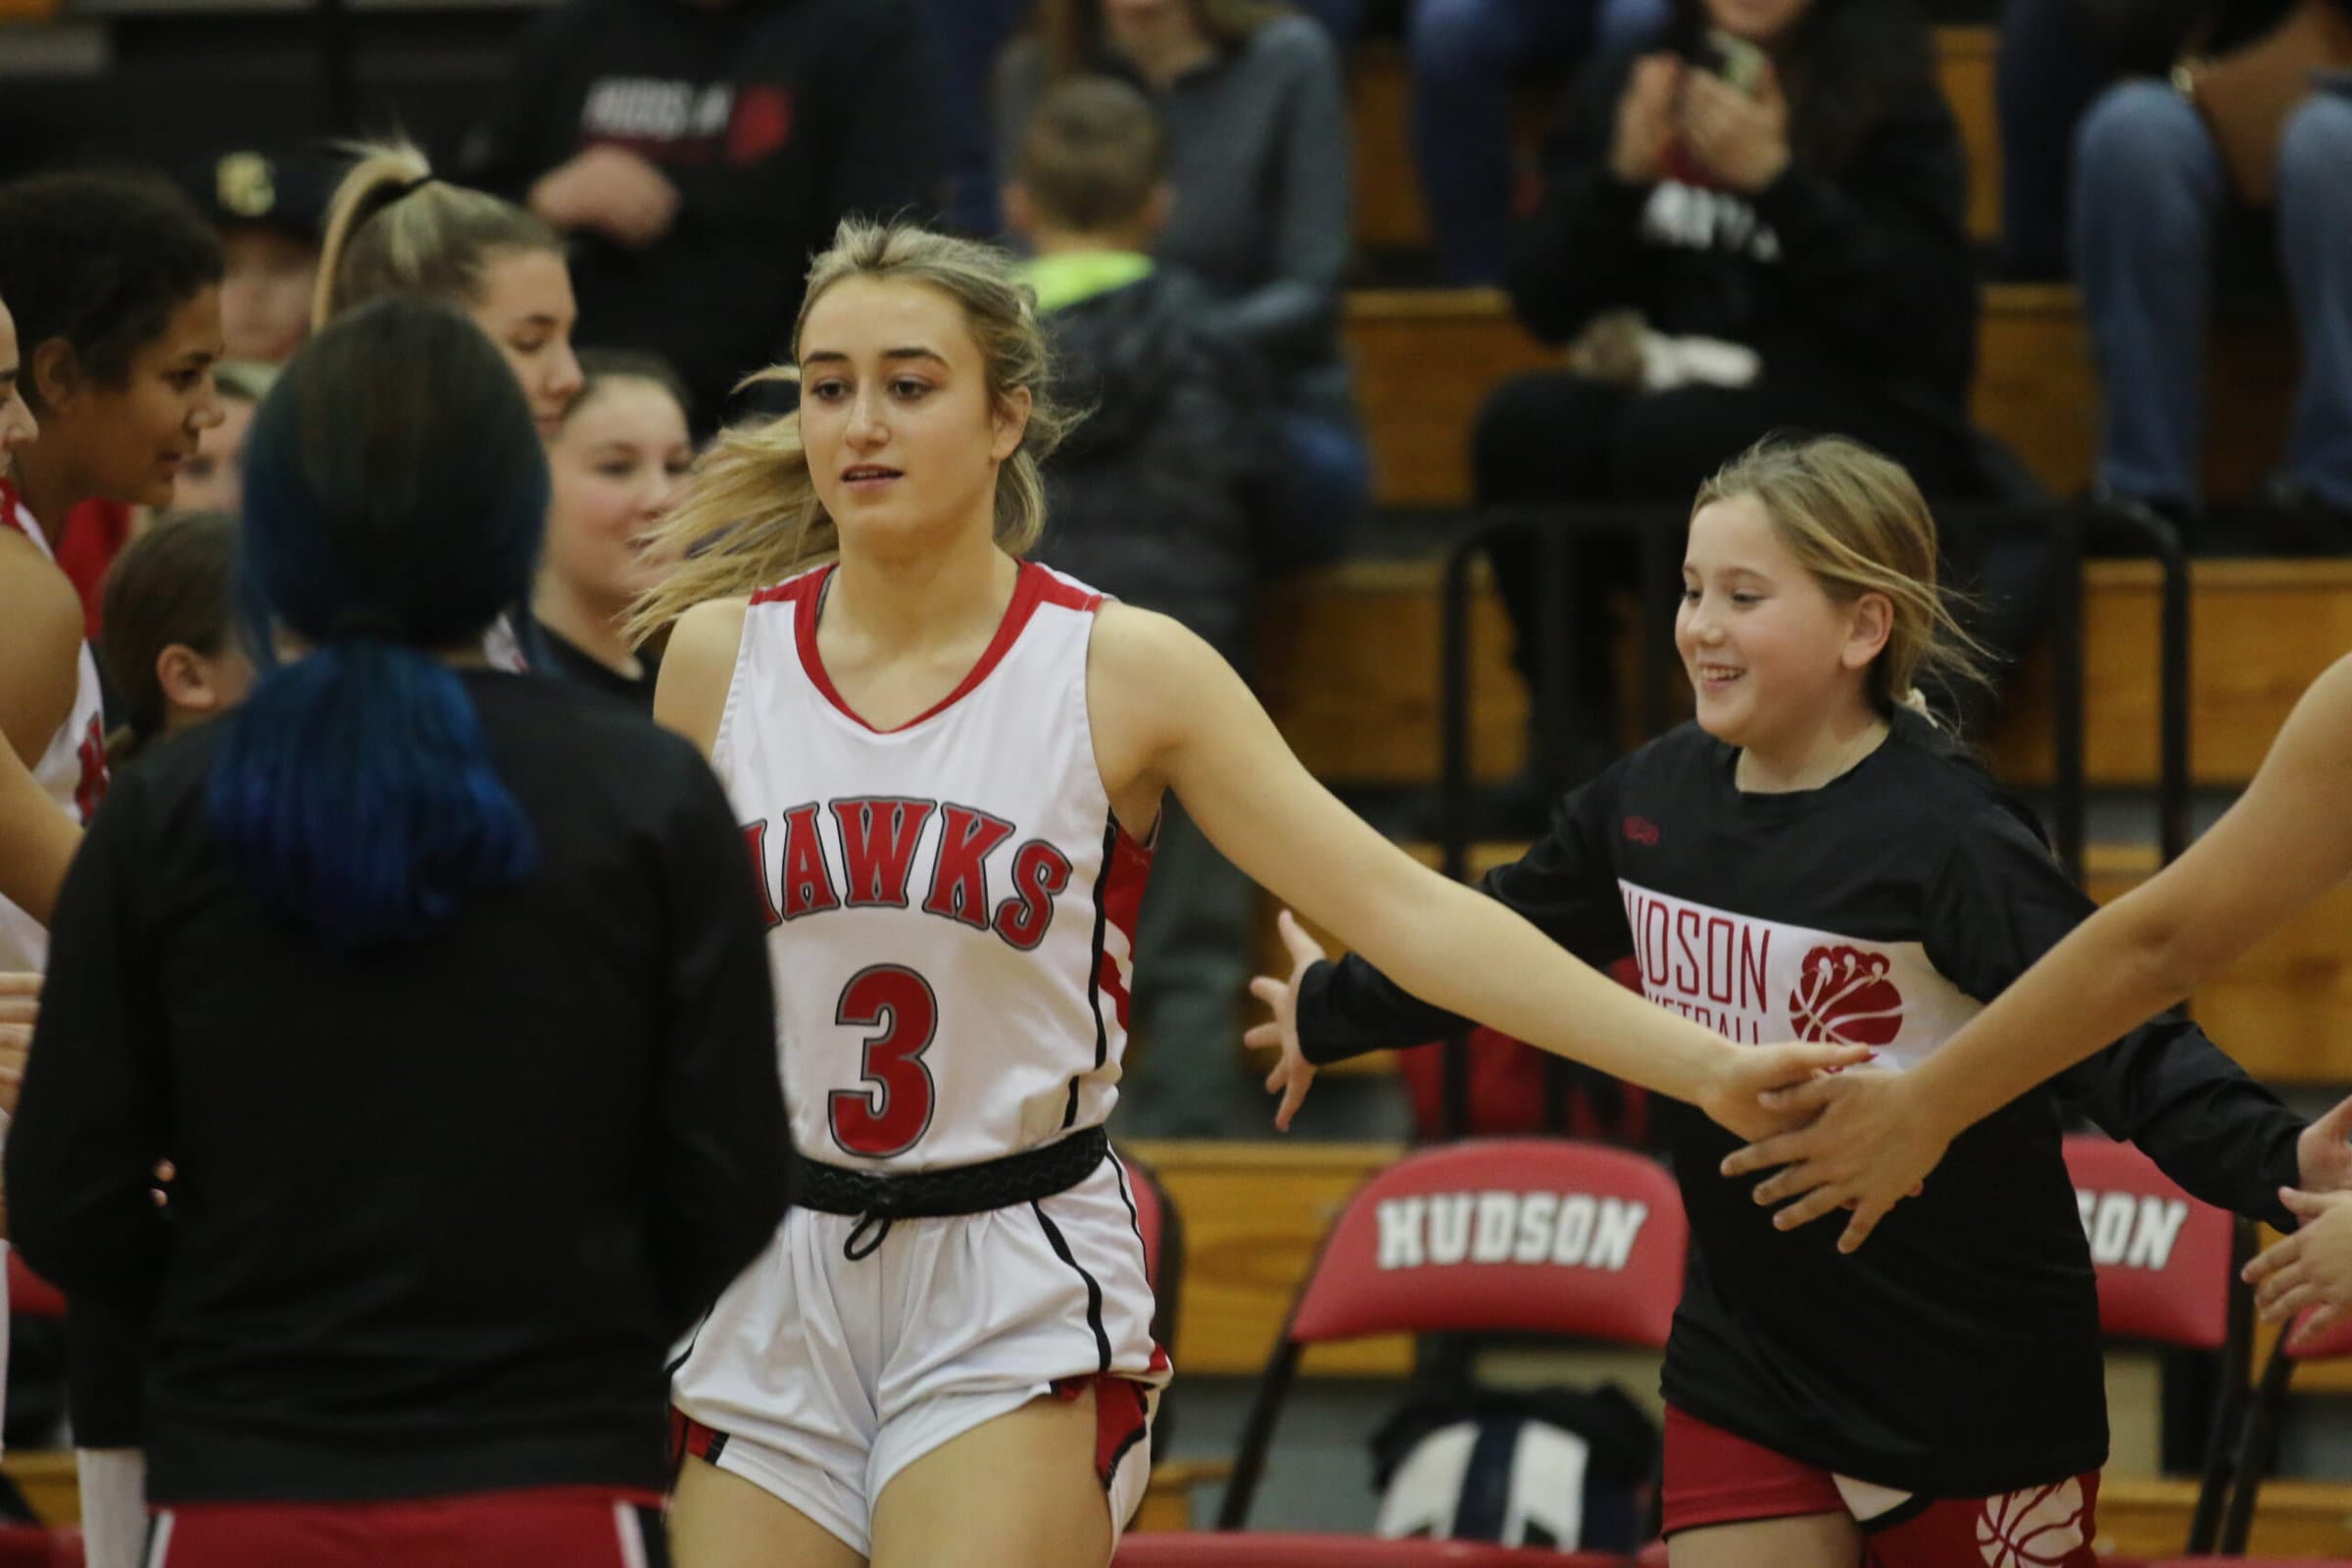 Hudson Hawks inspire a new generation of basketball players